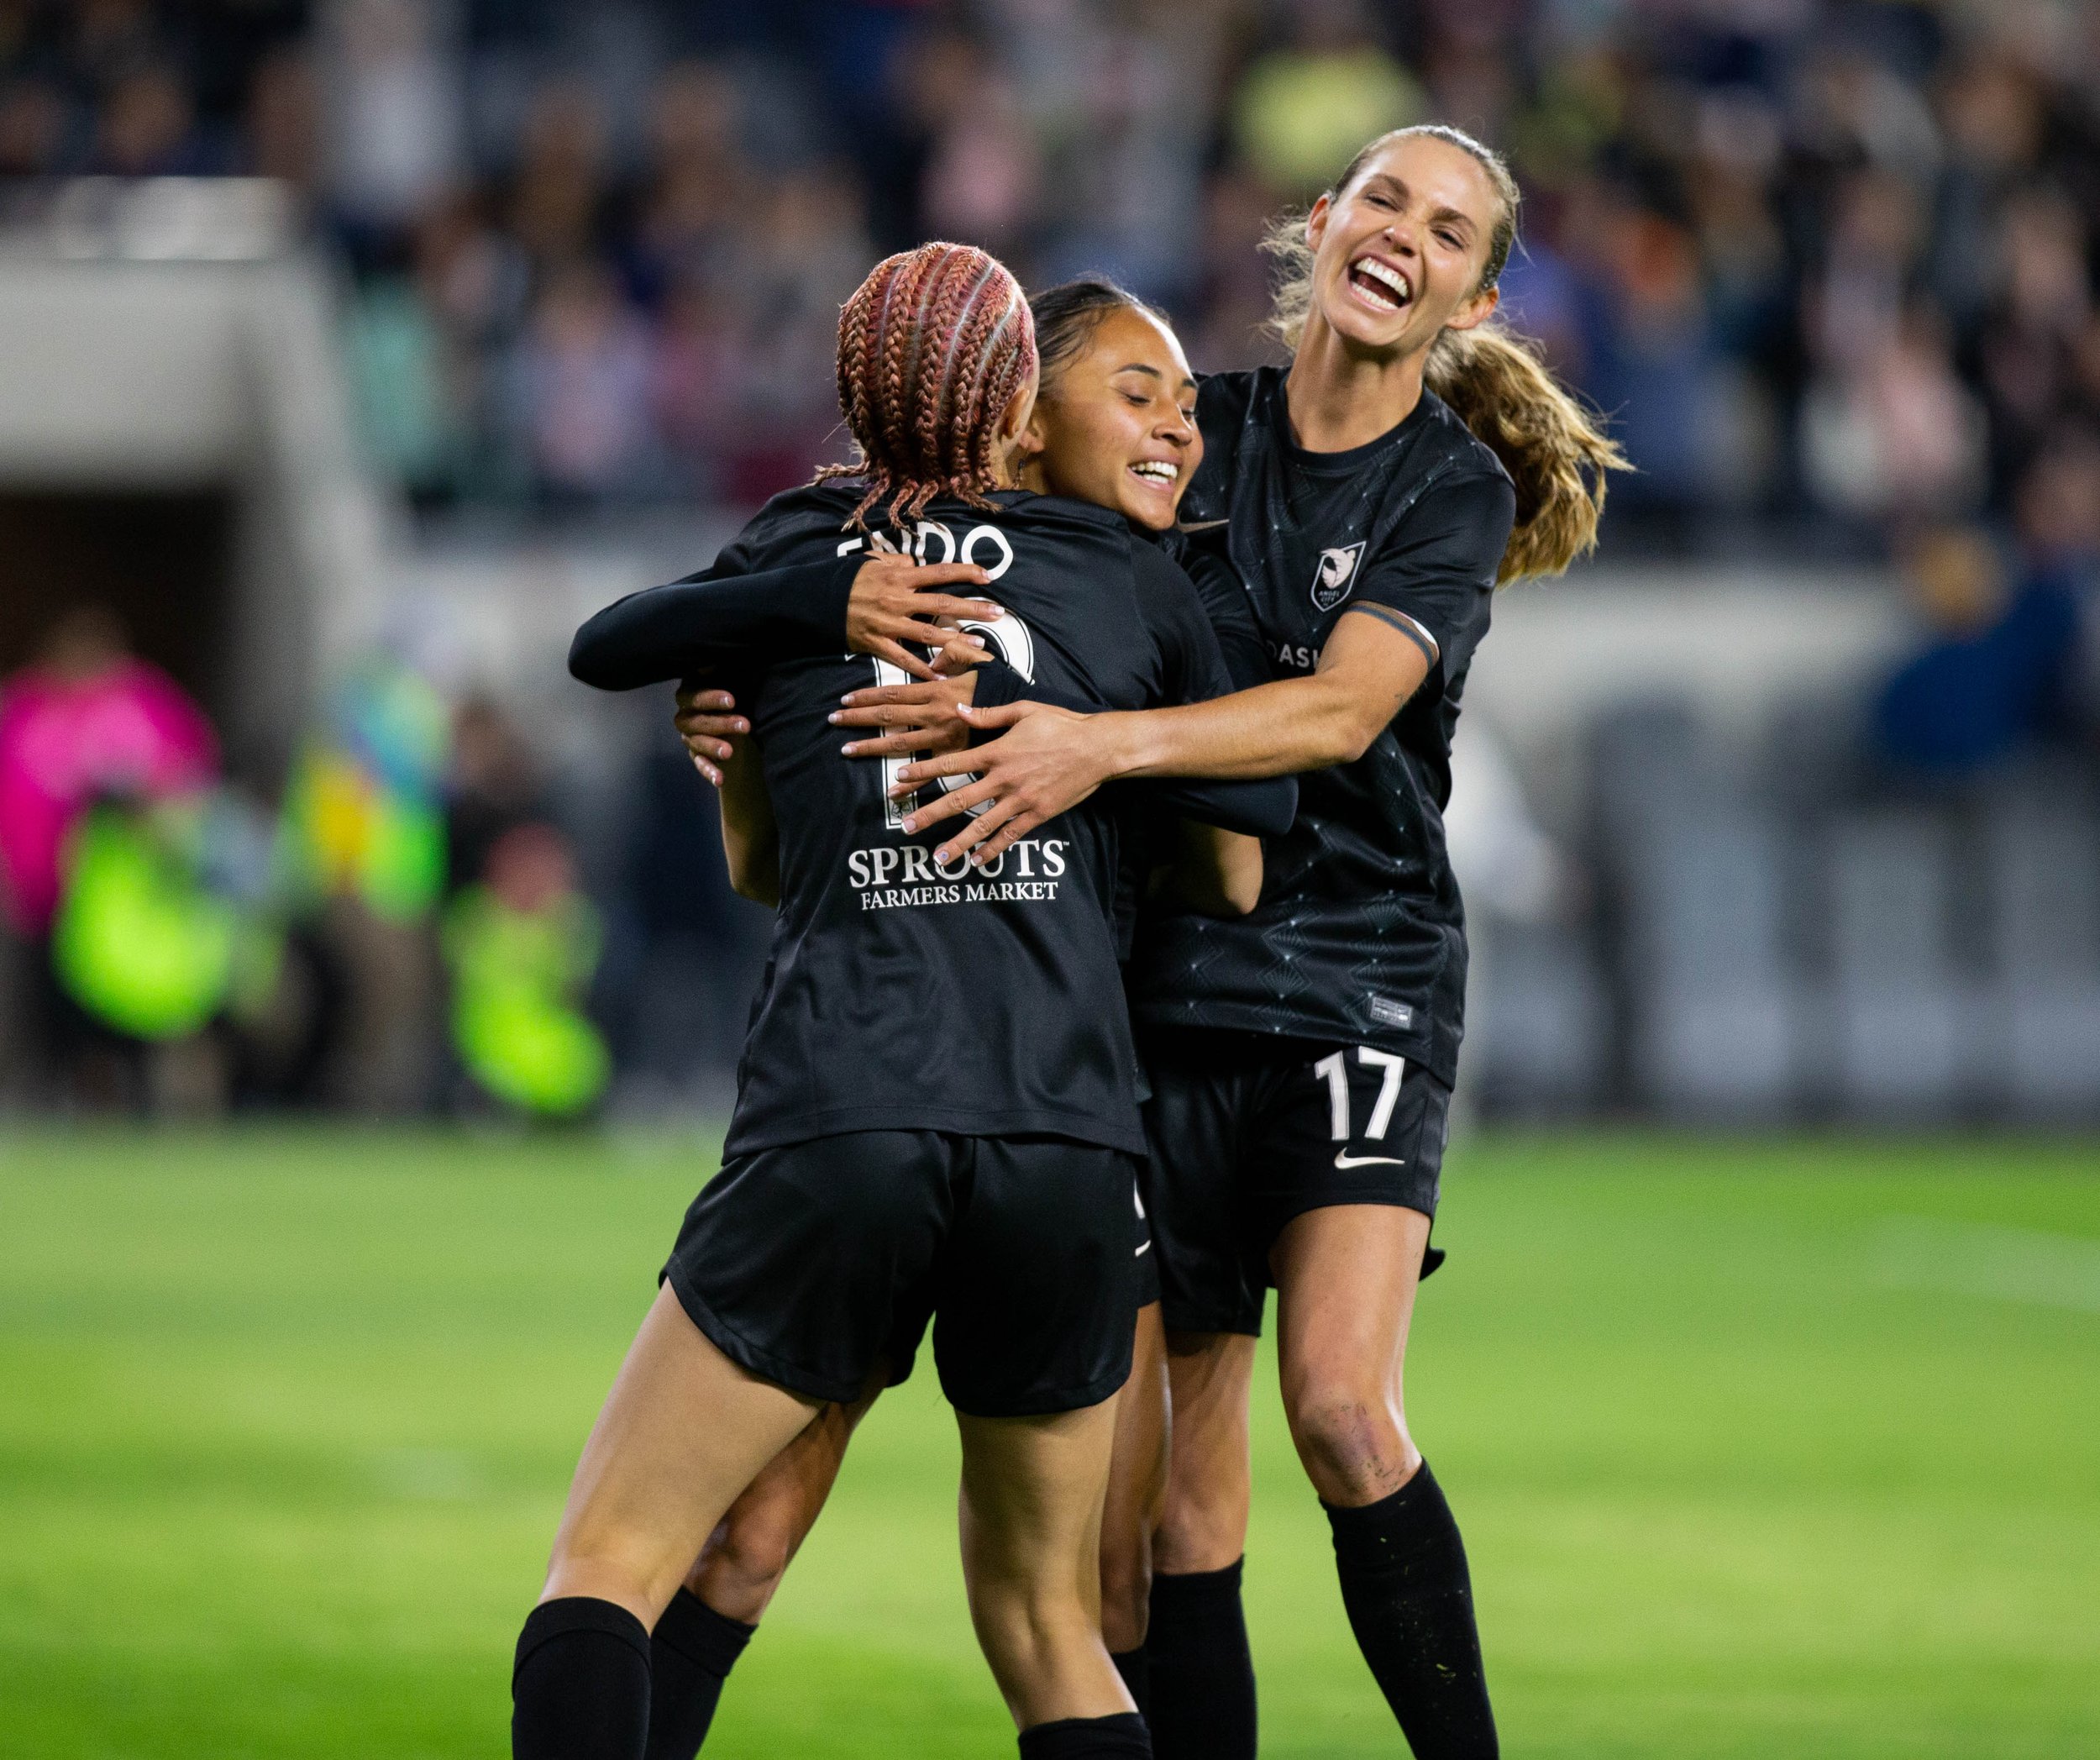  Angel City Fc players Jun Endo(18), Dani Weatherholt(17) celebrating with Alyssa Thompson(21) after scoring her first career goal in the begining of the match during their international friendly against Club America Femenil on Wed. March 8, 2023 at 